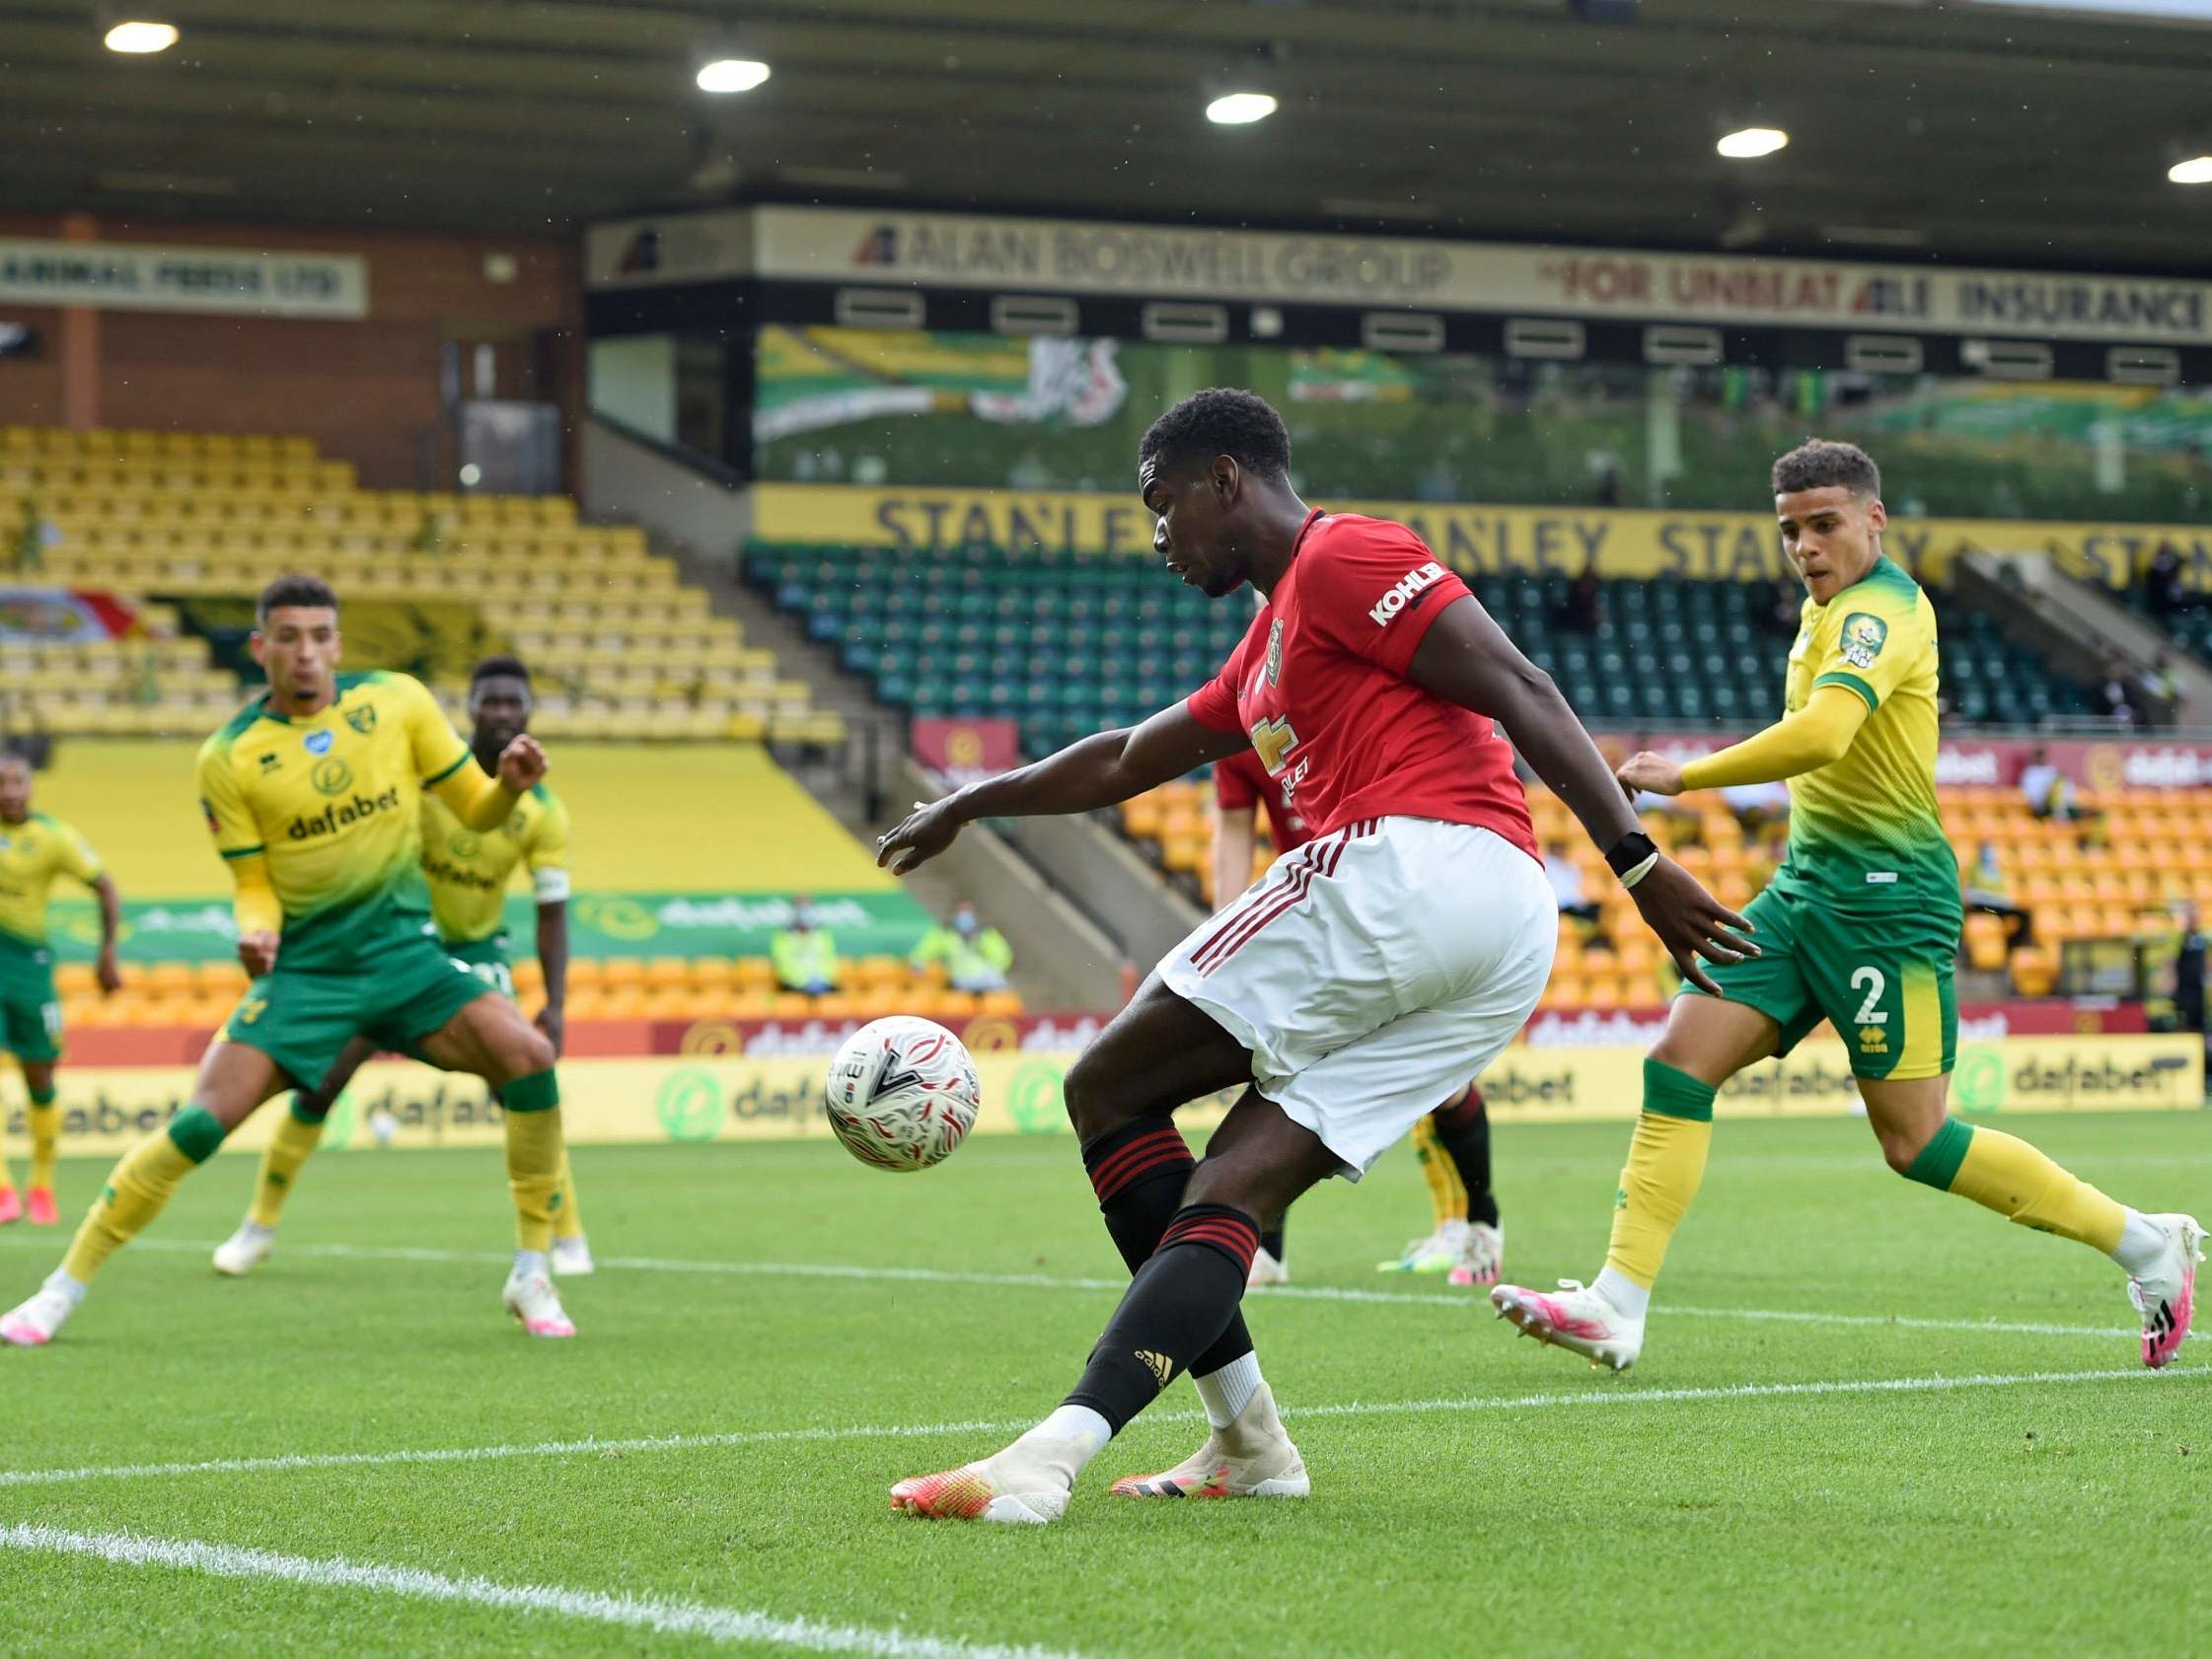 Norwich City vs Manchester United: Five things we learned as Harry Maguire scores late winner